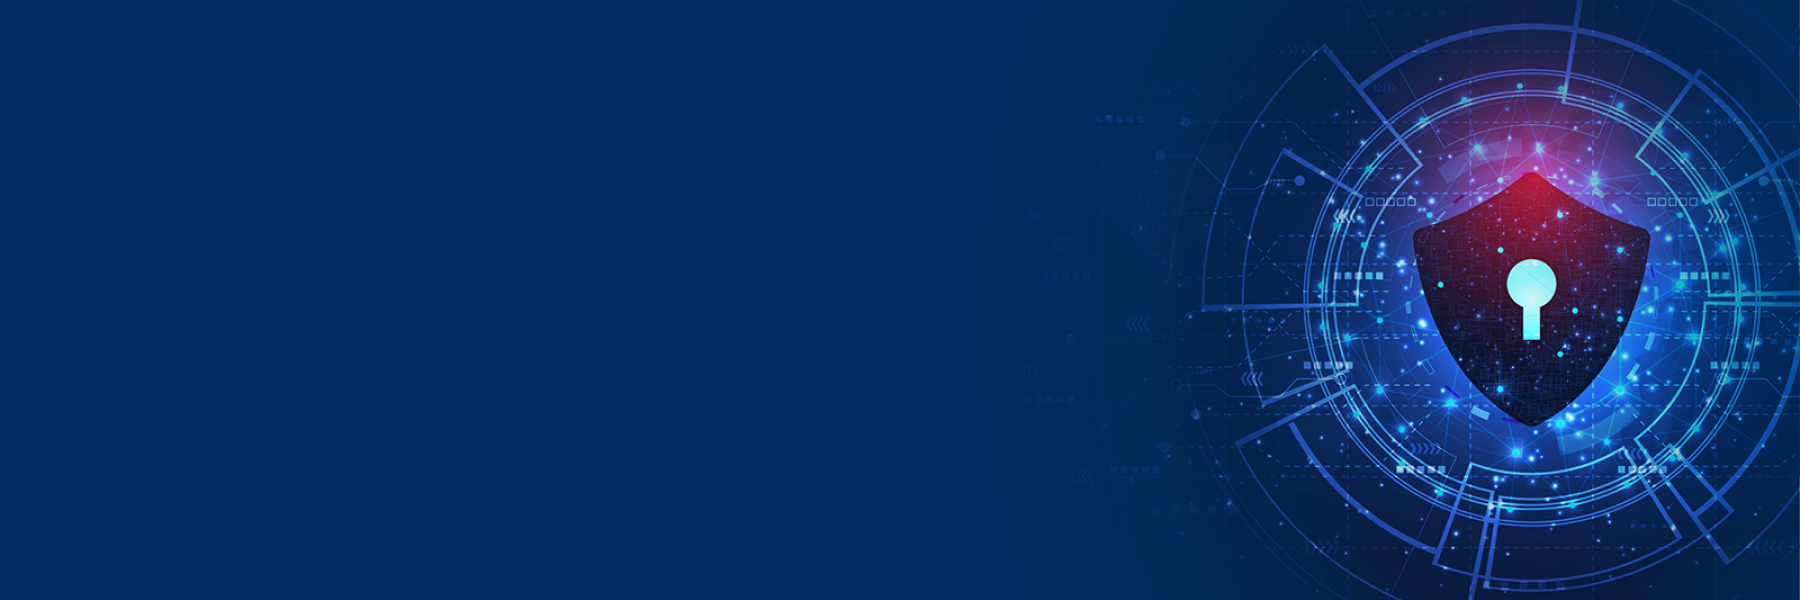 Abstract cybersecurity banner